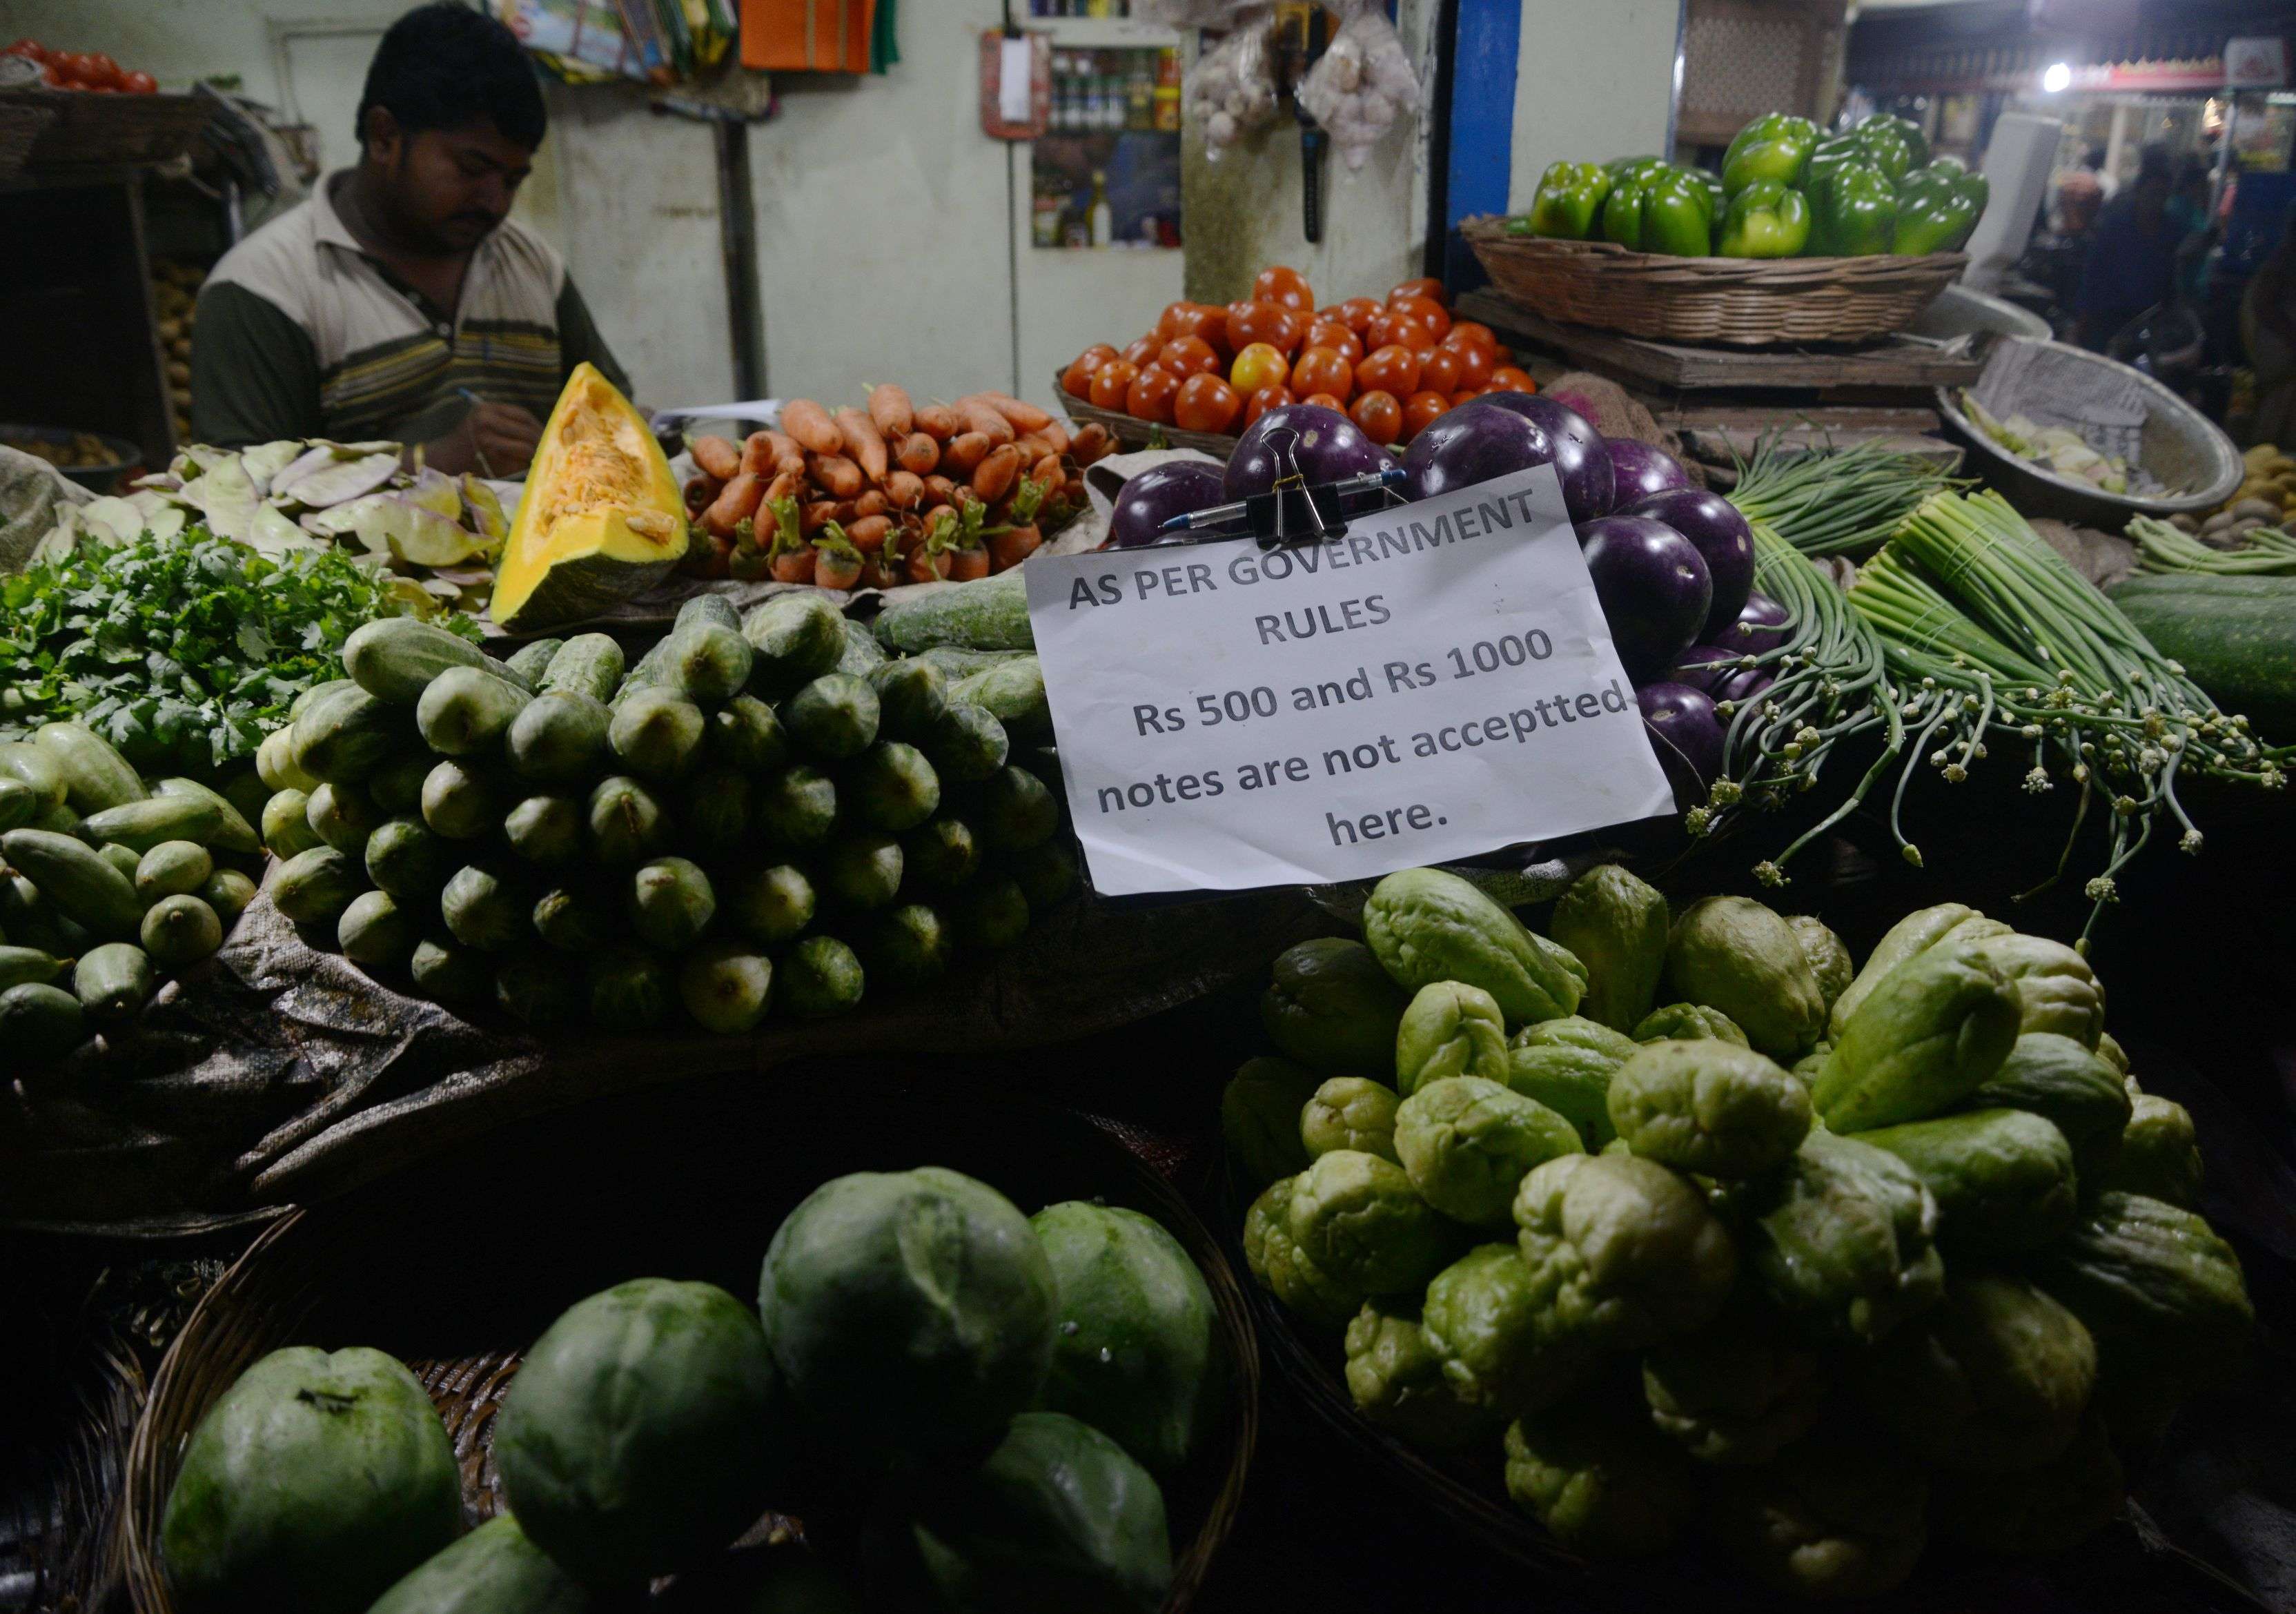 A vendor displays a sign relating to new nationwide currency regulations in Siliguri city, in the Indian state of West Bengal, on November 13. Photo: AFP